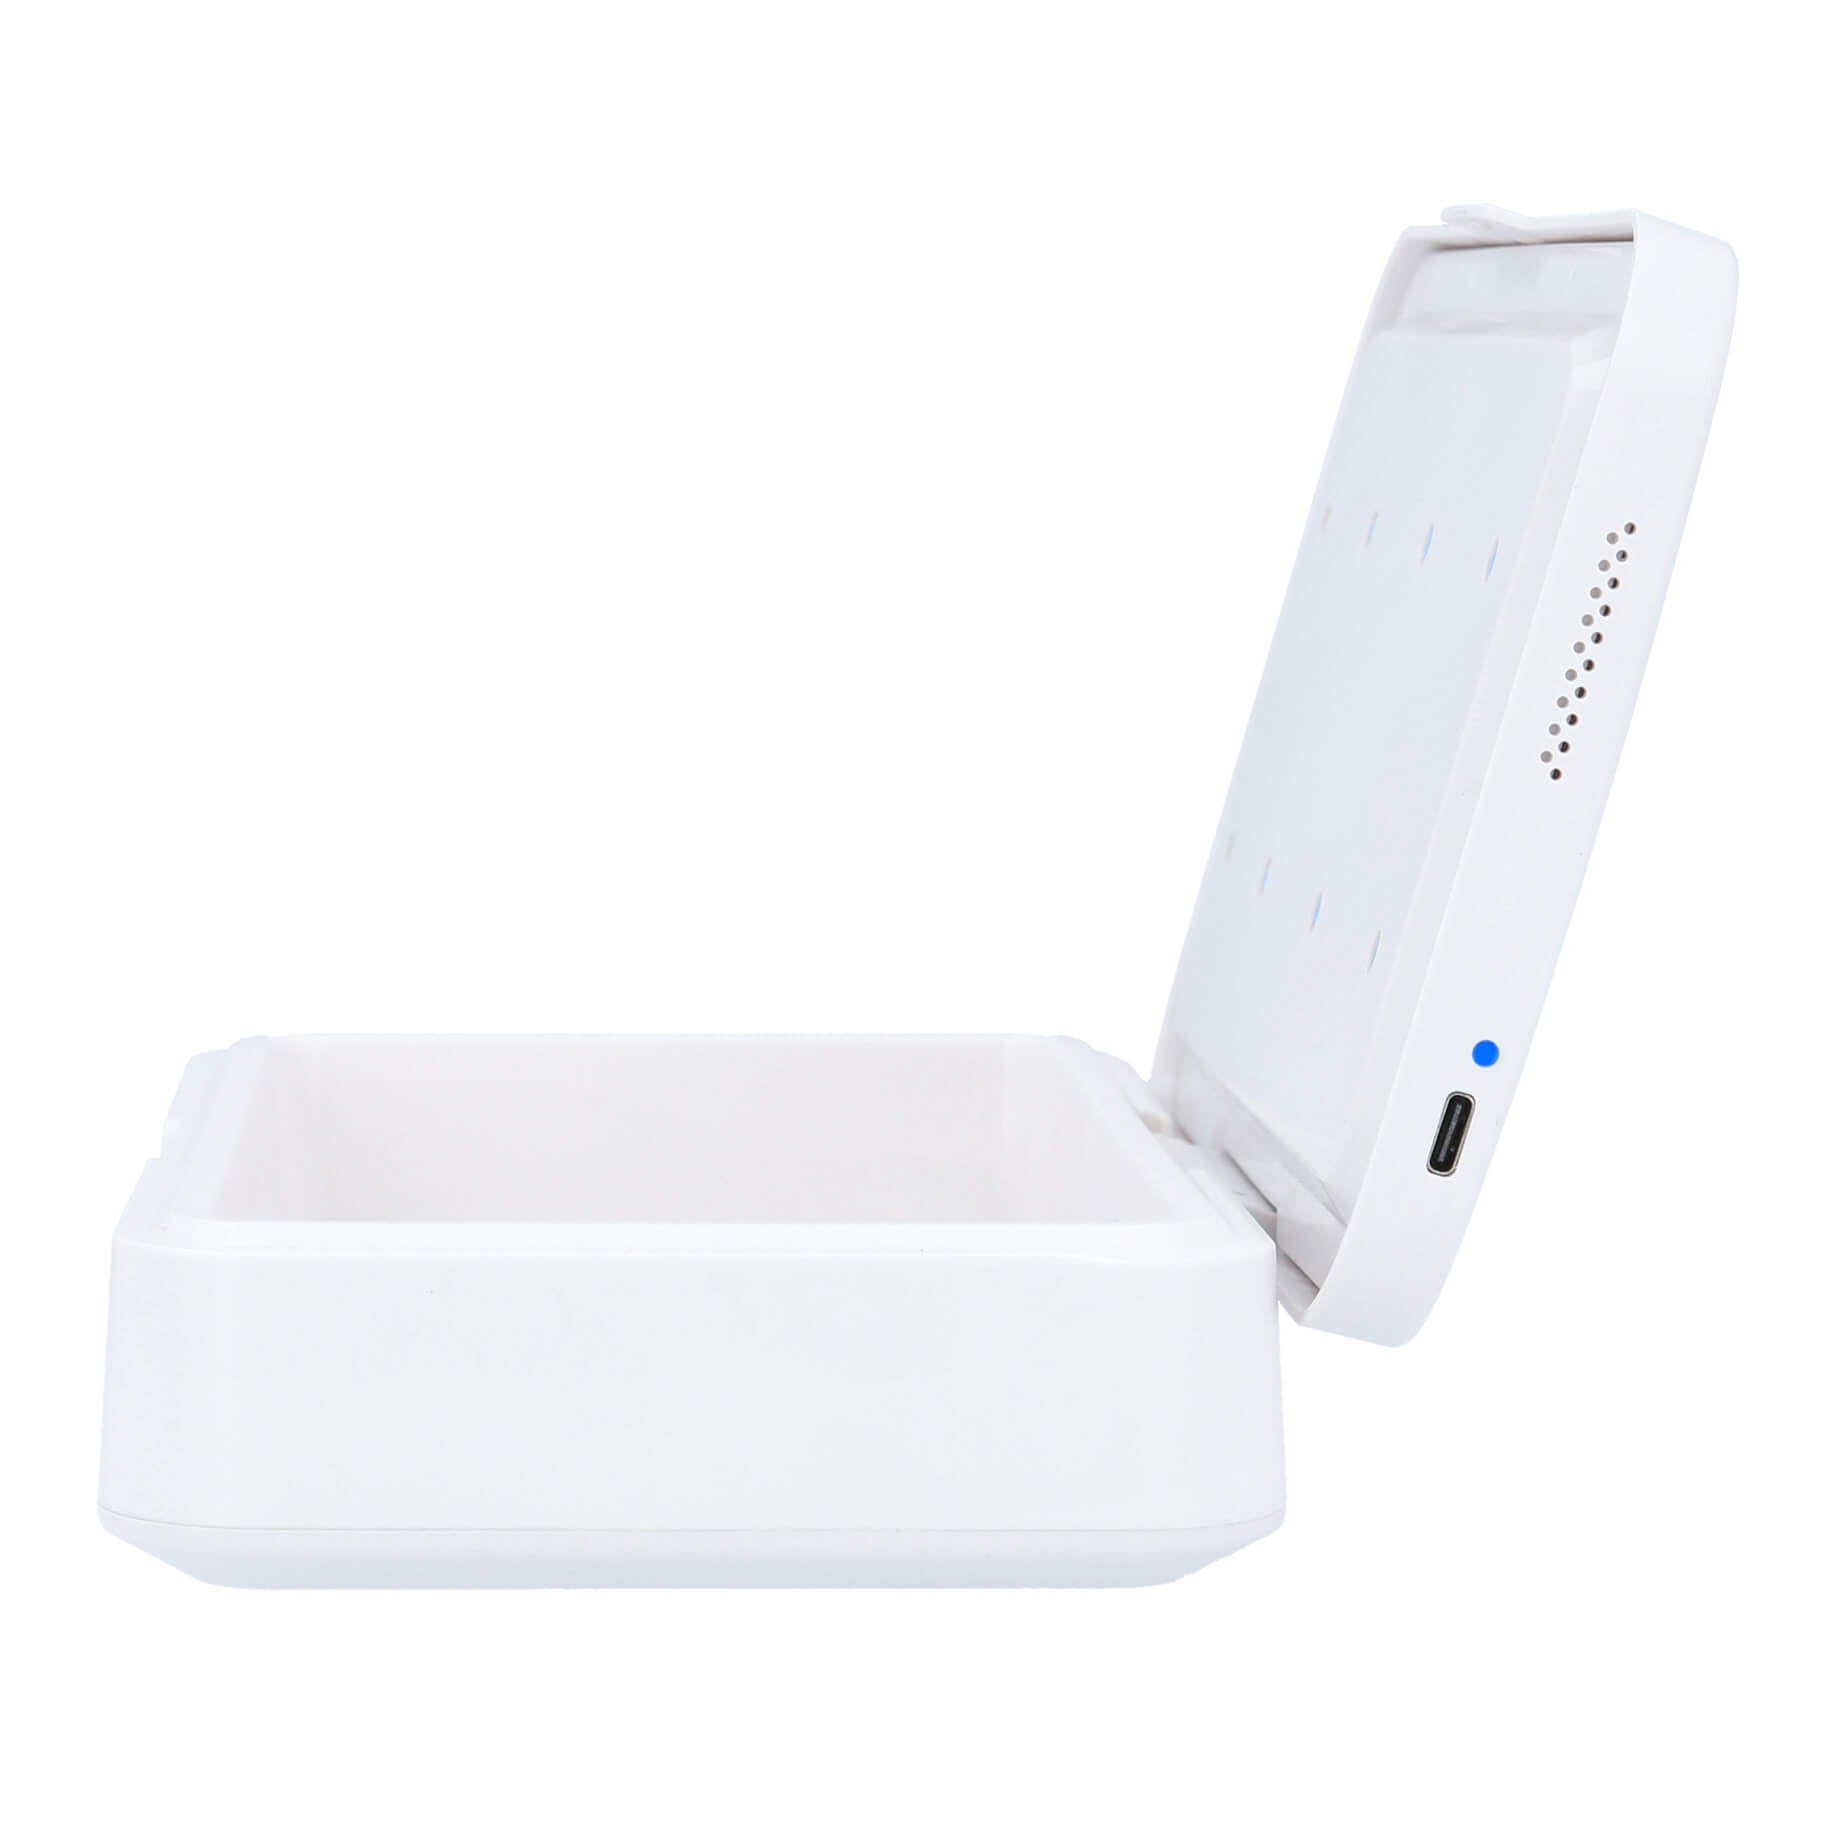 uv sanitizing light box, can disinfect over 99% of germs